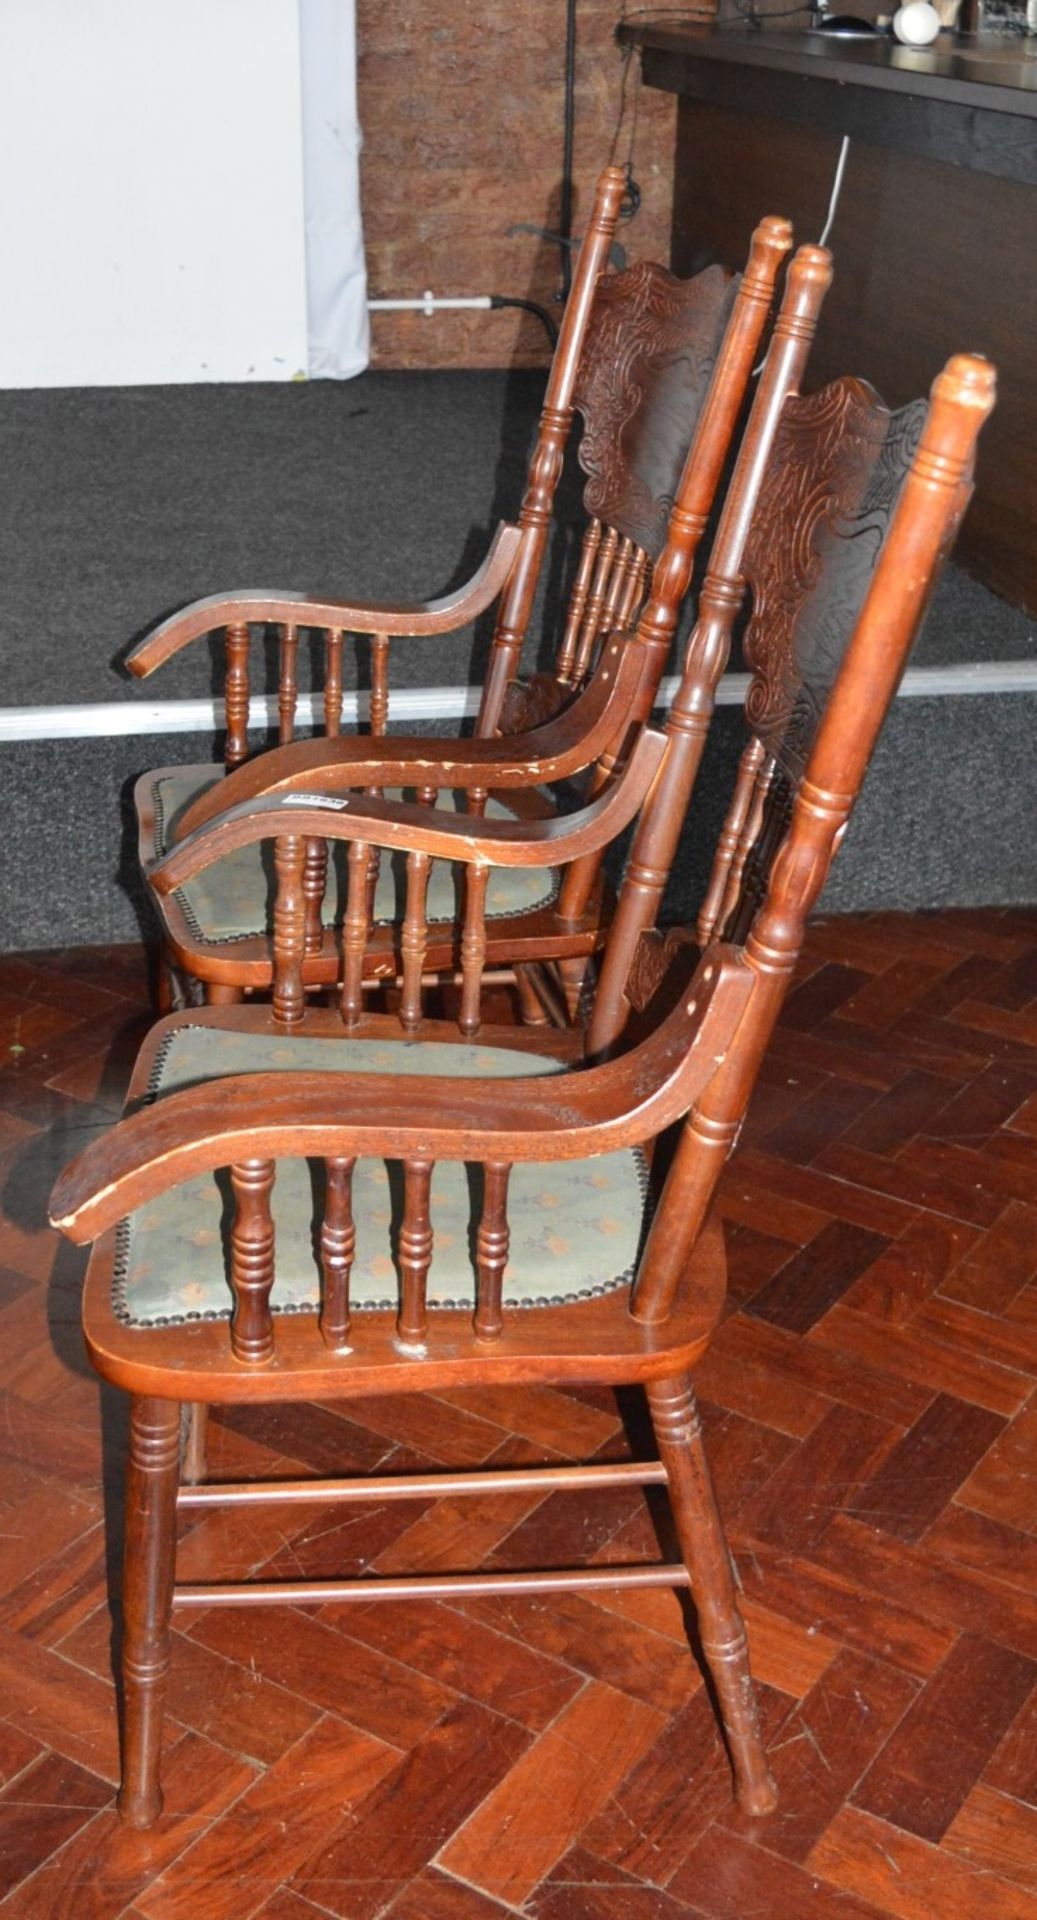 23 x Dining Chairs With Etched Spindle Backs and Fabrc Seat Pads - Ref BB000 - CL351 - Location: - Image 6 of 9